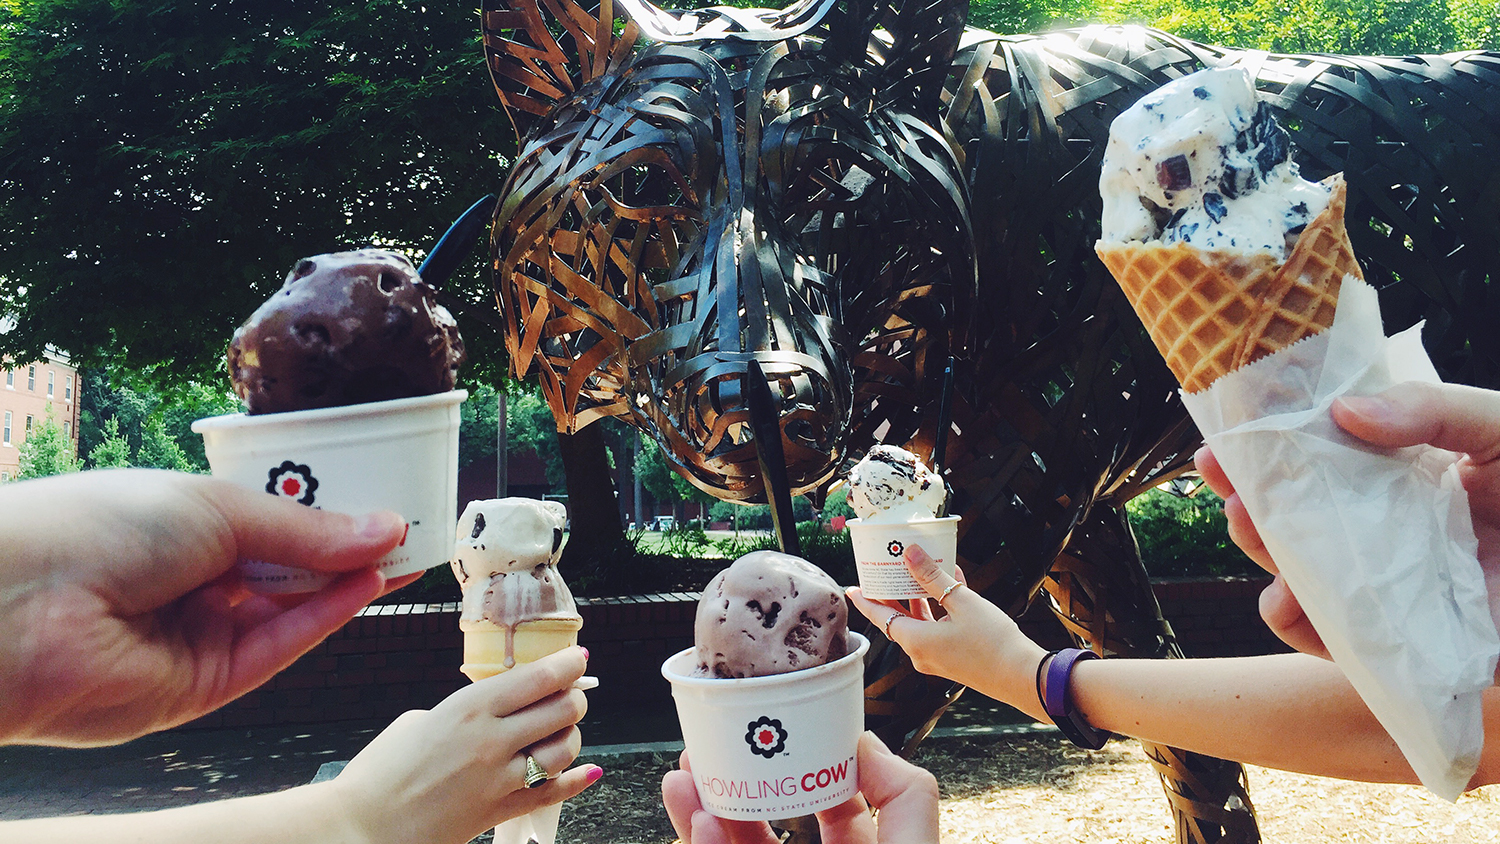 Five hands hold up Howling Cow ice cream scoops near a brass wolf.